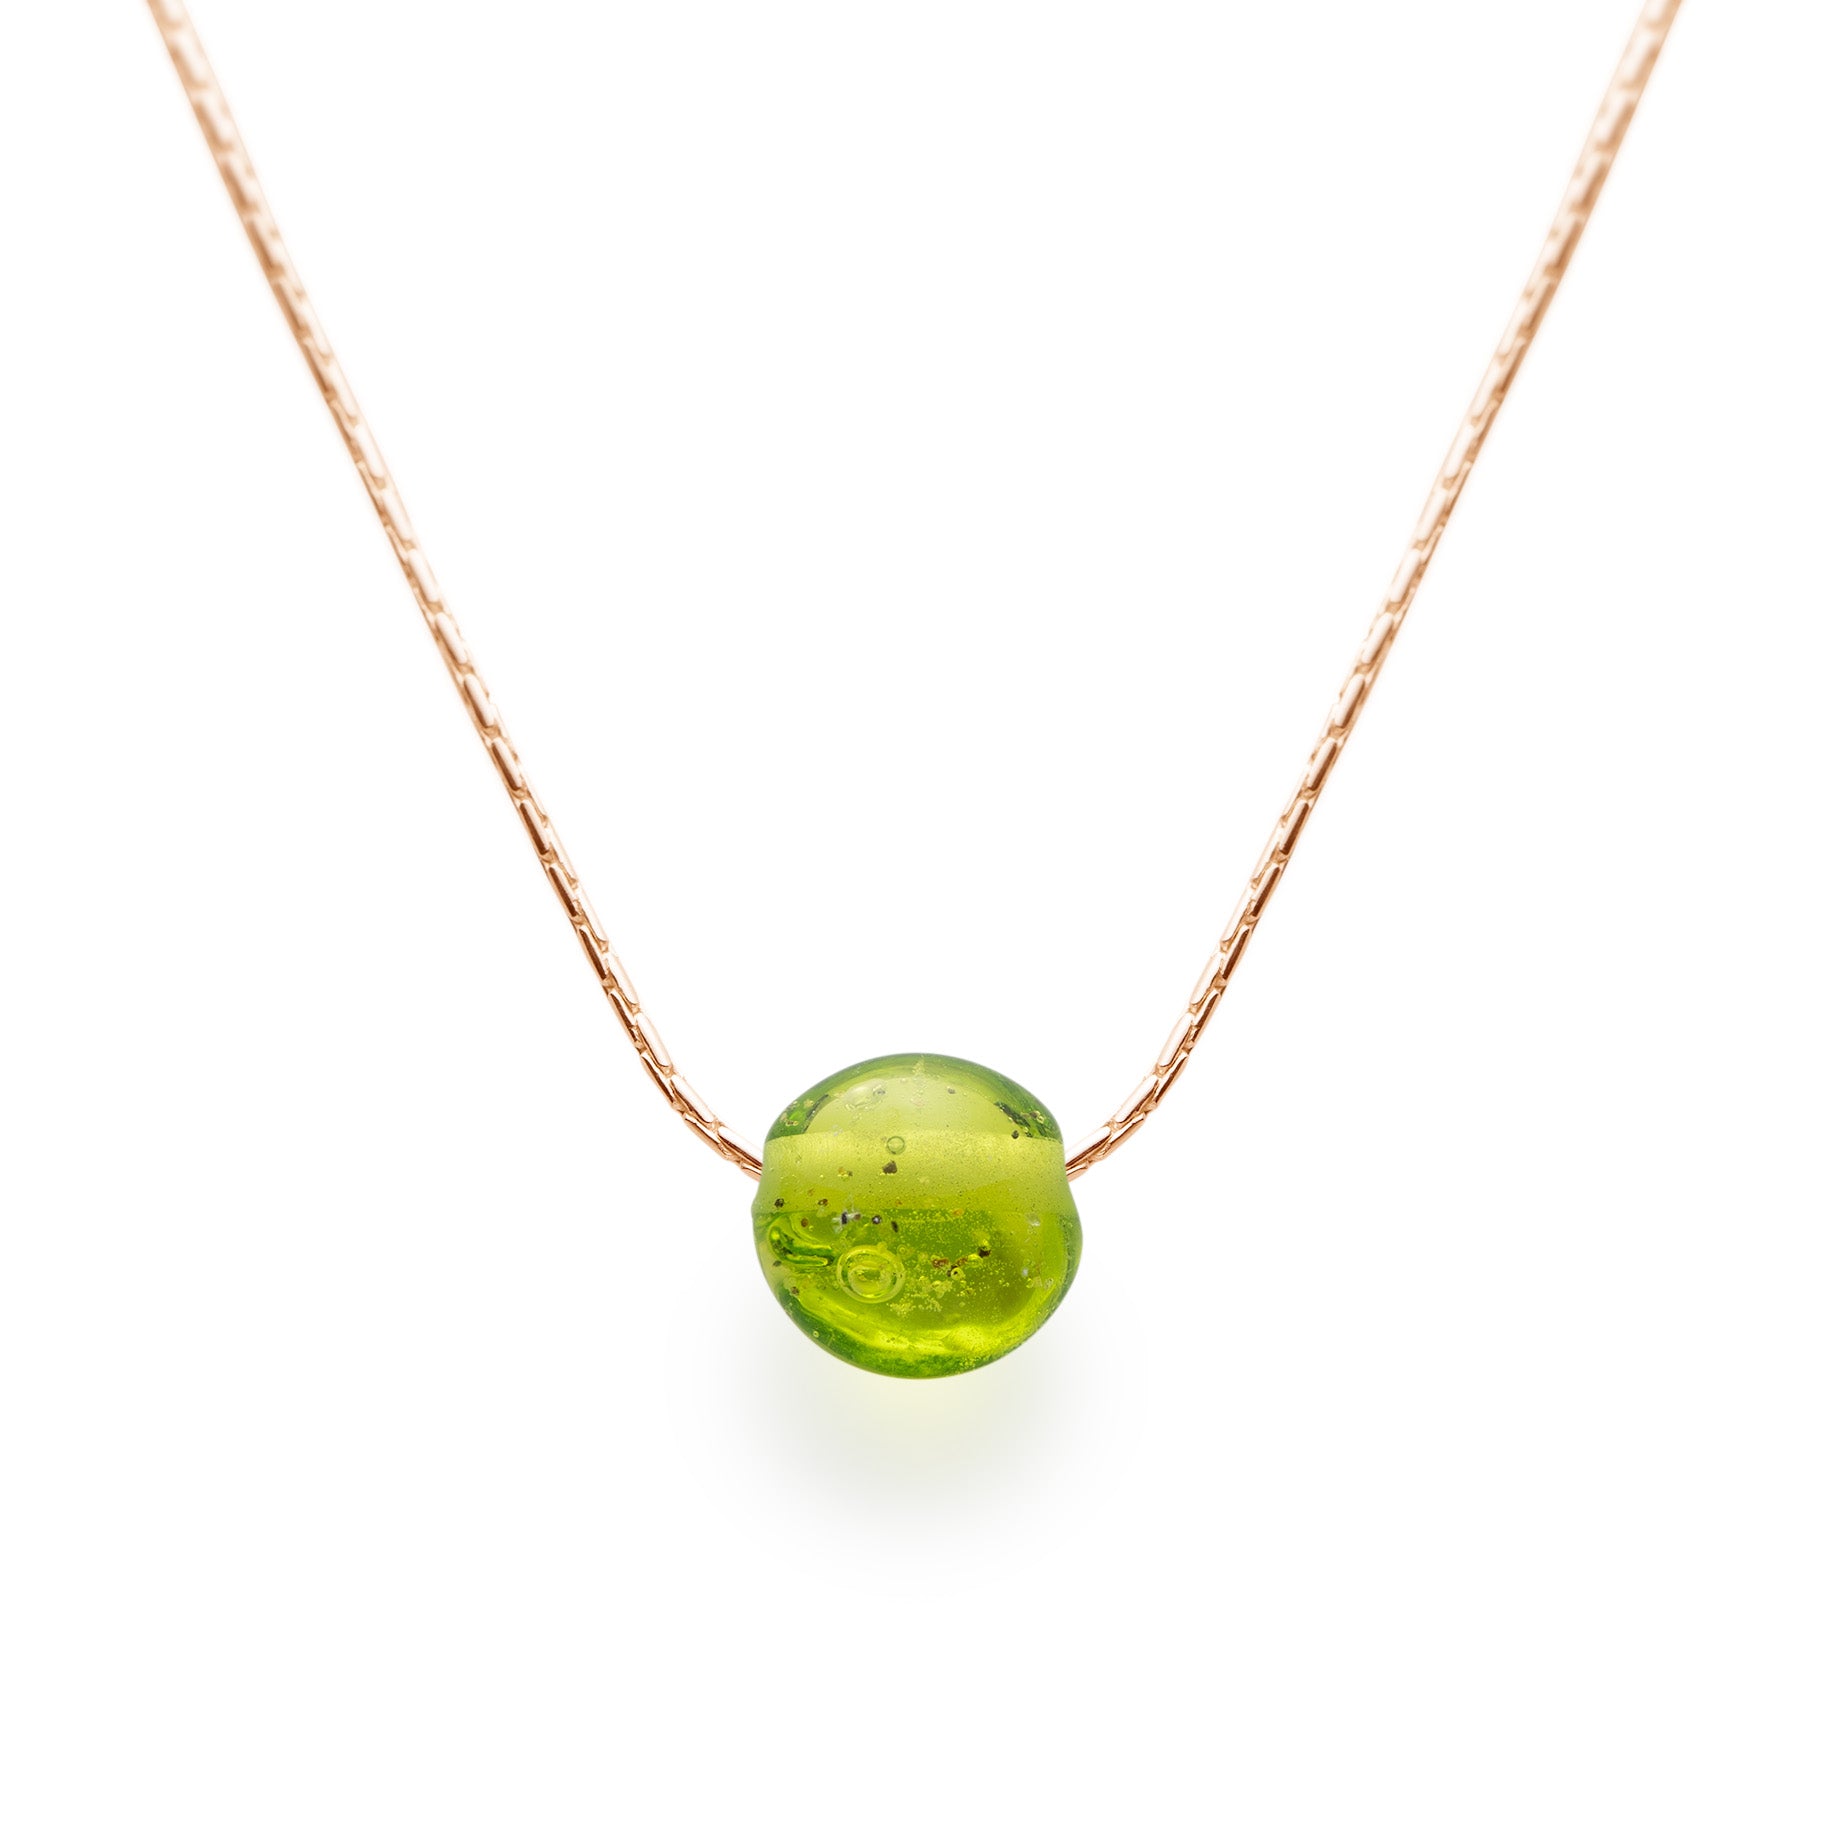 Apple green glass bead necklace with beach sand on gold fill fine chain necklace.